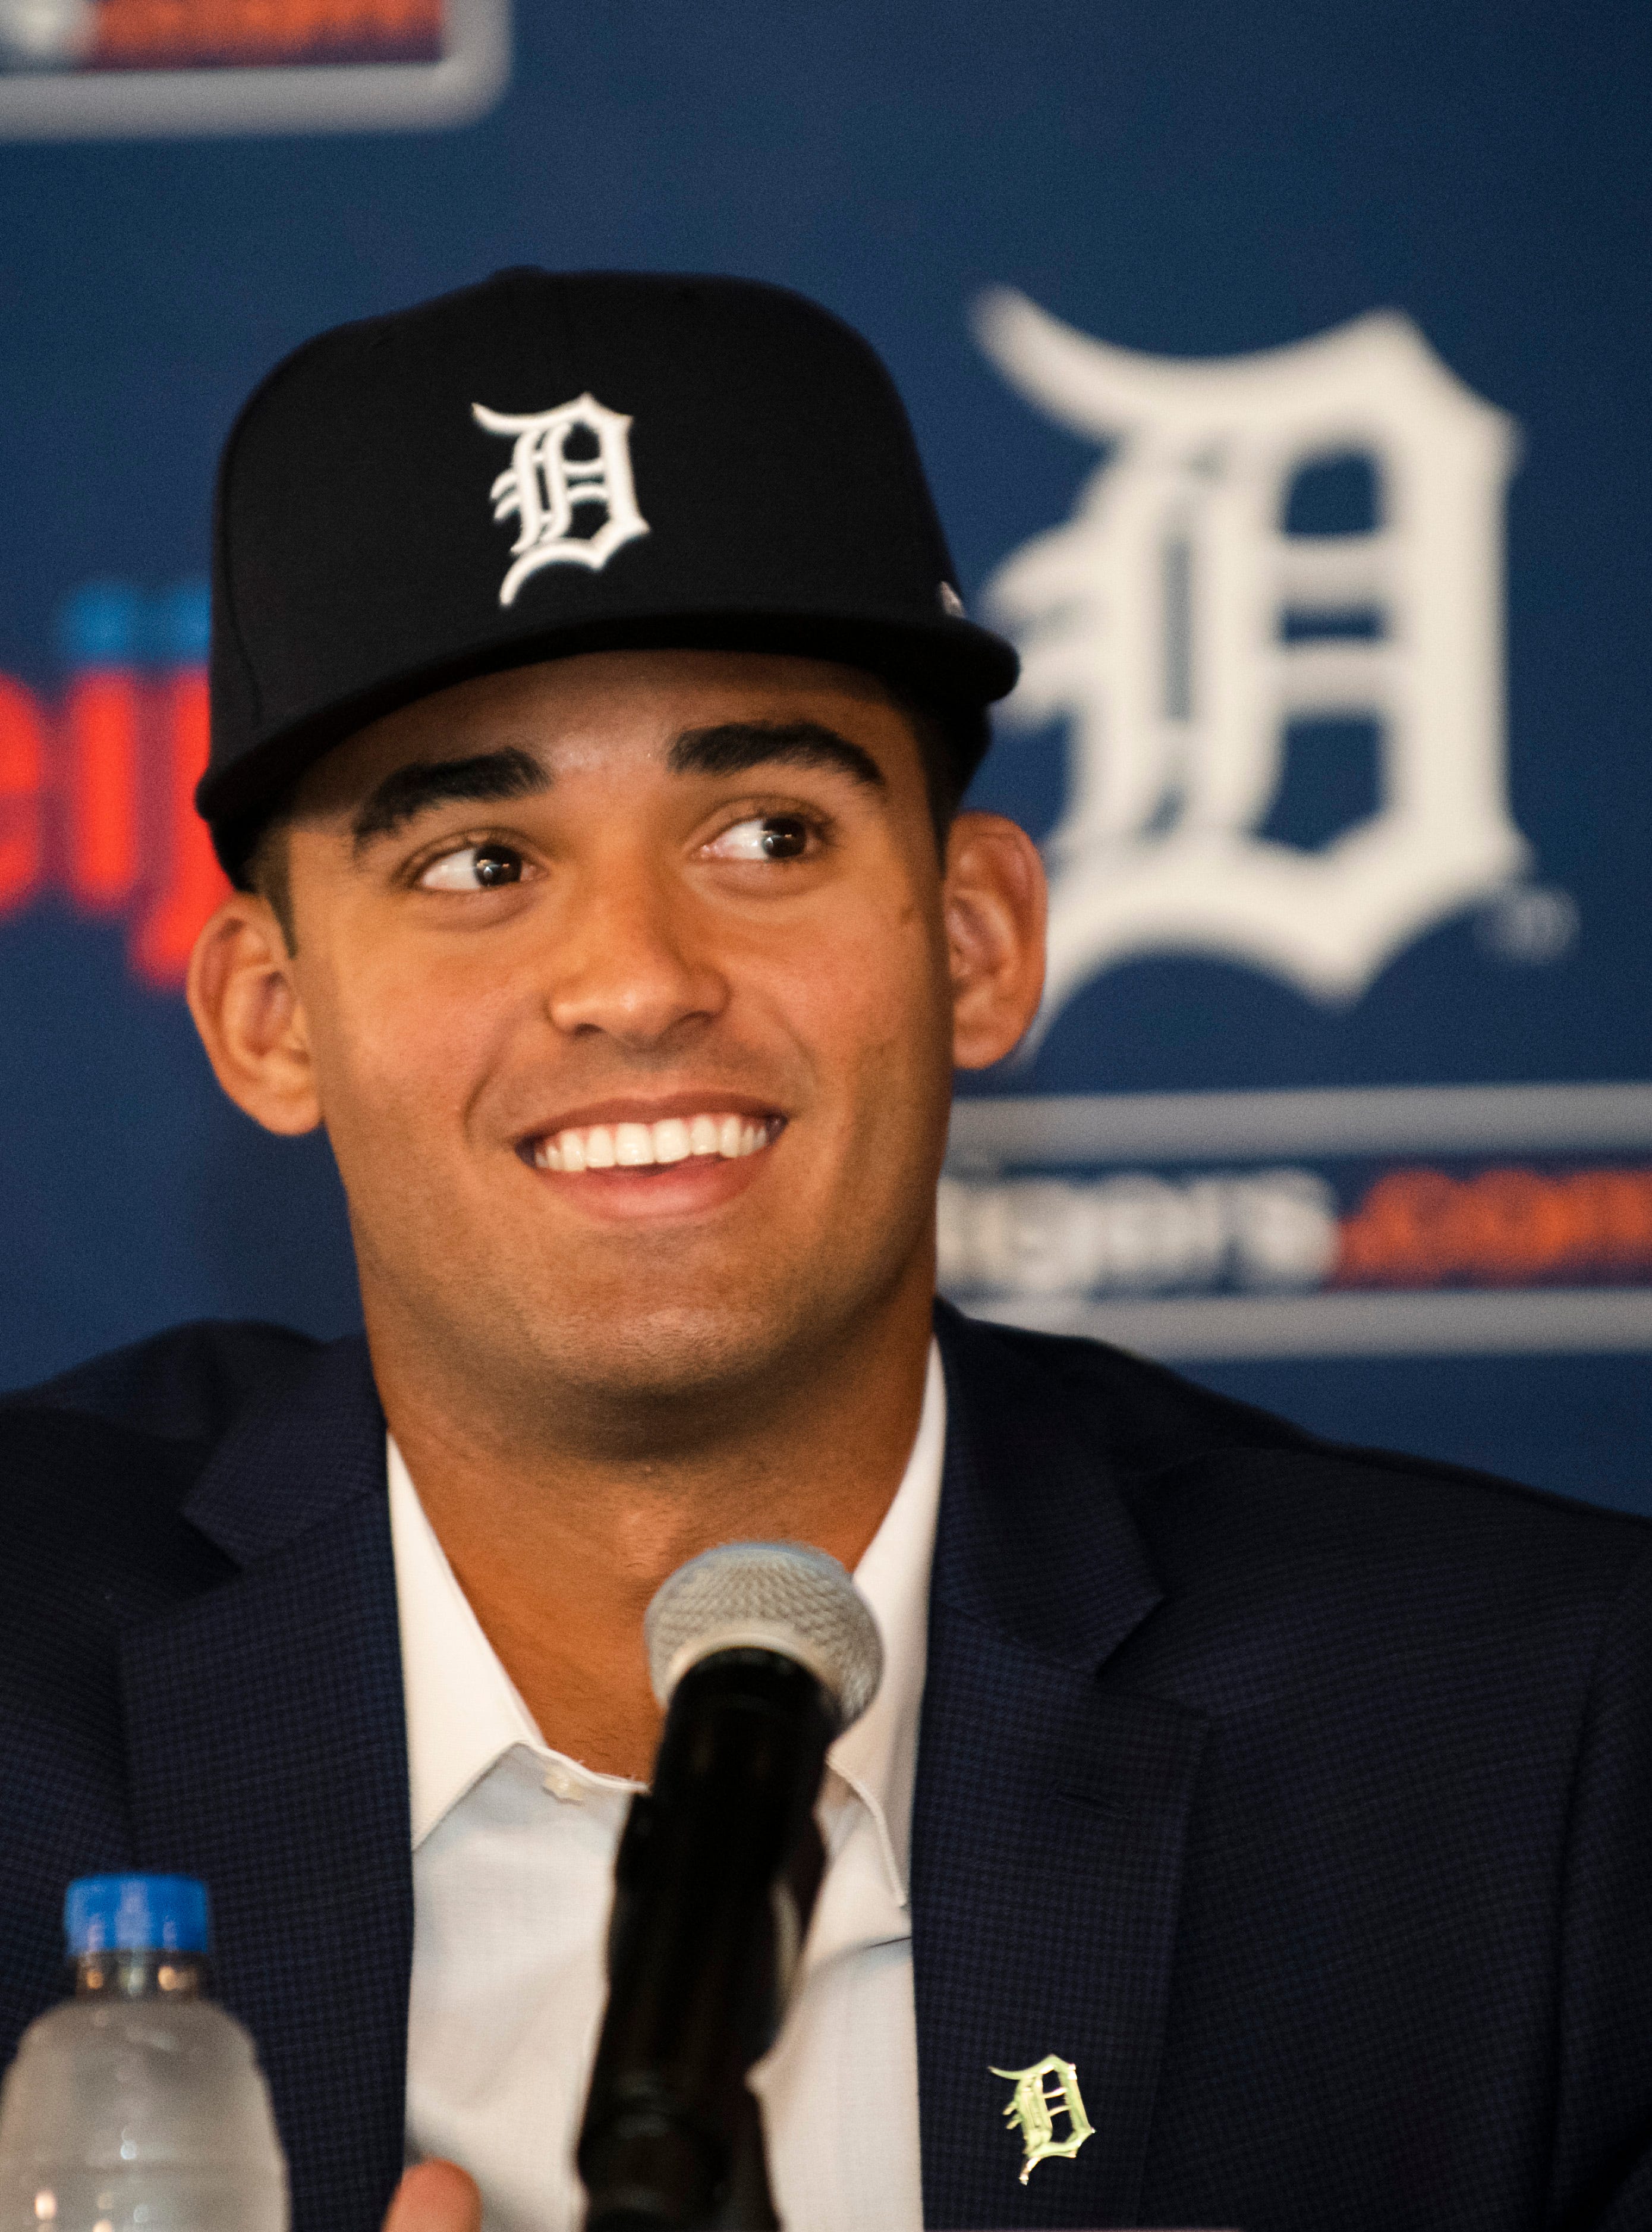 4. Riley Greene, 19, 6-3, 200, OF: Not much chance the Tigers missed here with last year’s fifth-overall draft grab. Greene is a sublime athlete and left-handed hitter who did just fine during stops at three minor-league posts, all before he turned 19. He’ll get a full taste of Class A baseball in 2020. He should confirm that his skills are long-term talents likely to grow more lustrous as he approaches 20 and beyond. He needs to stay in the lineup, minus mishaps that are always an athlete’s demon-in-waiting. But with typical health the Tigers are grooming in Greene your typical star hitter and outfielder.